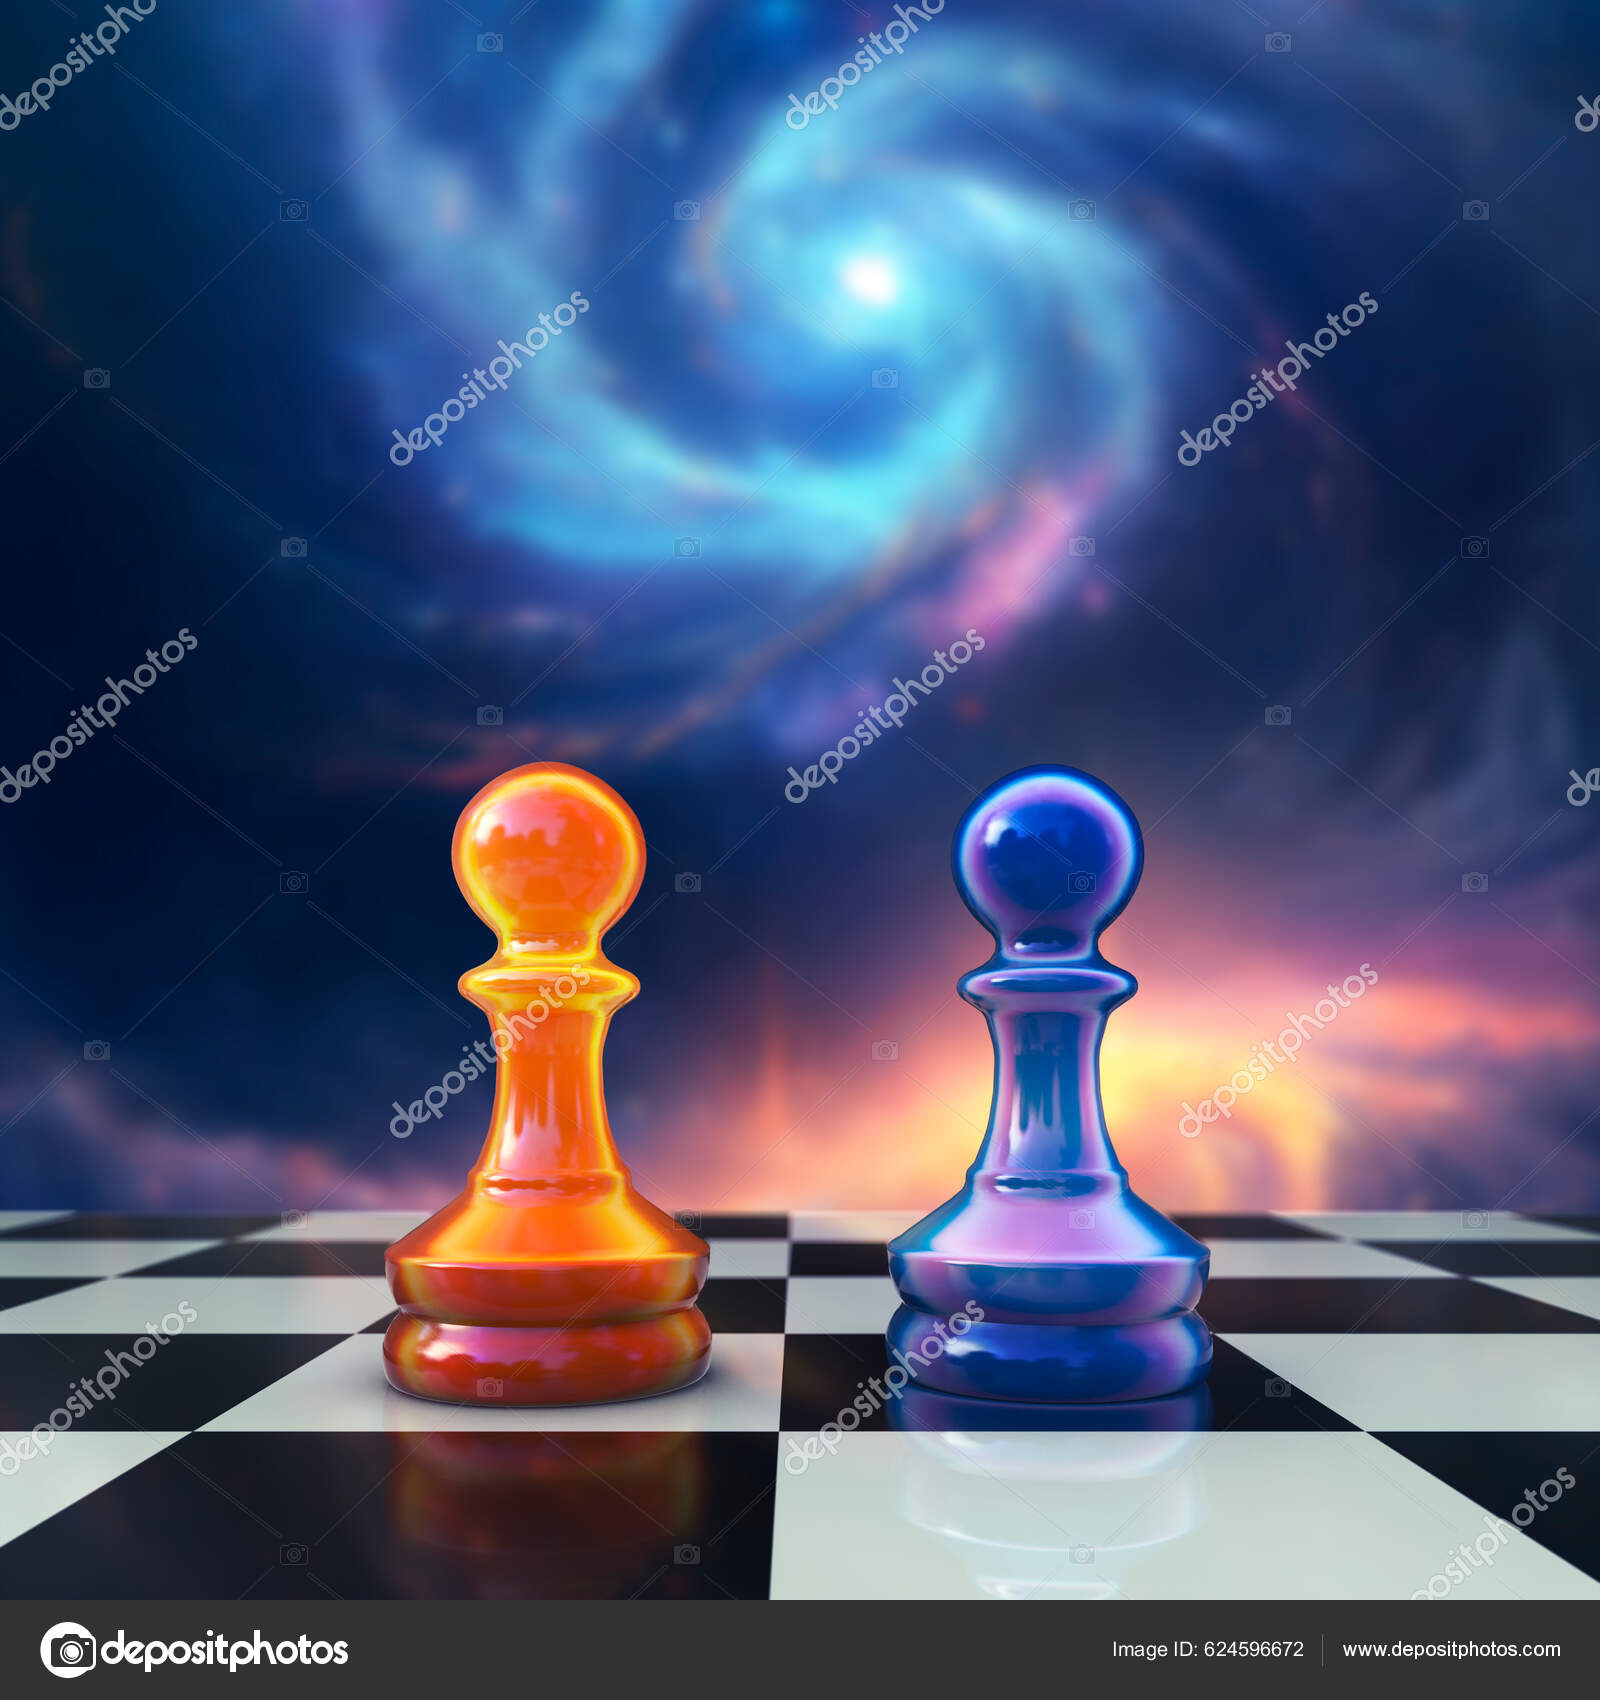 Chess game, 3D illustration. Italian opening, also known as Quiet